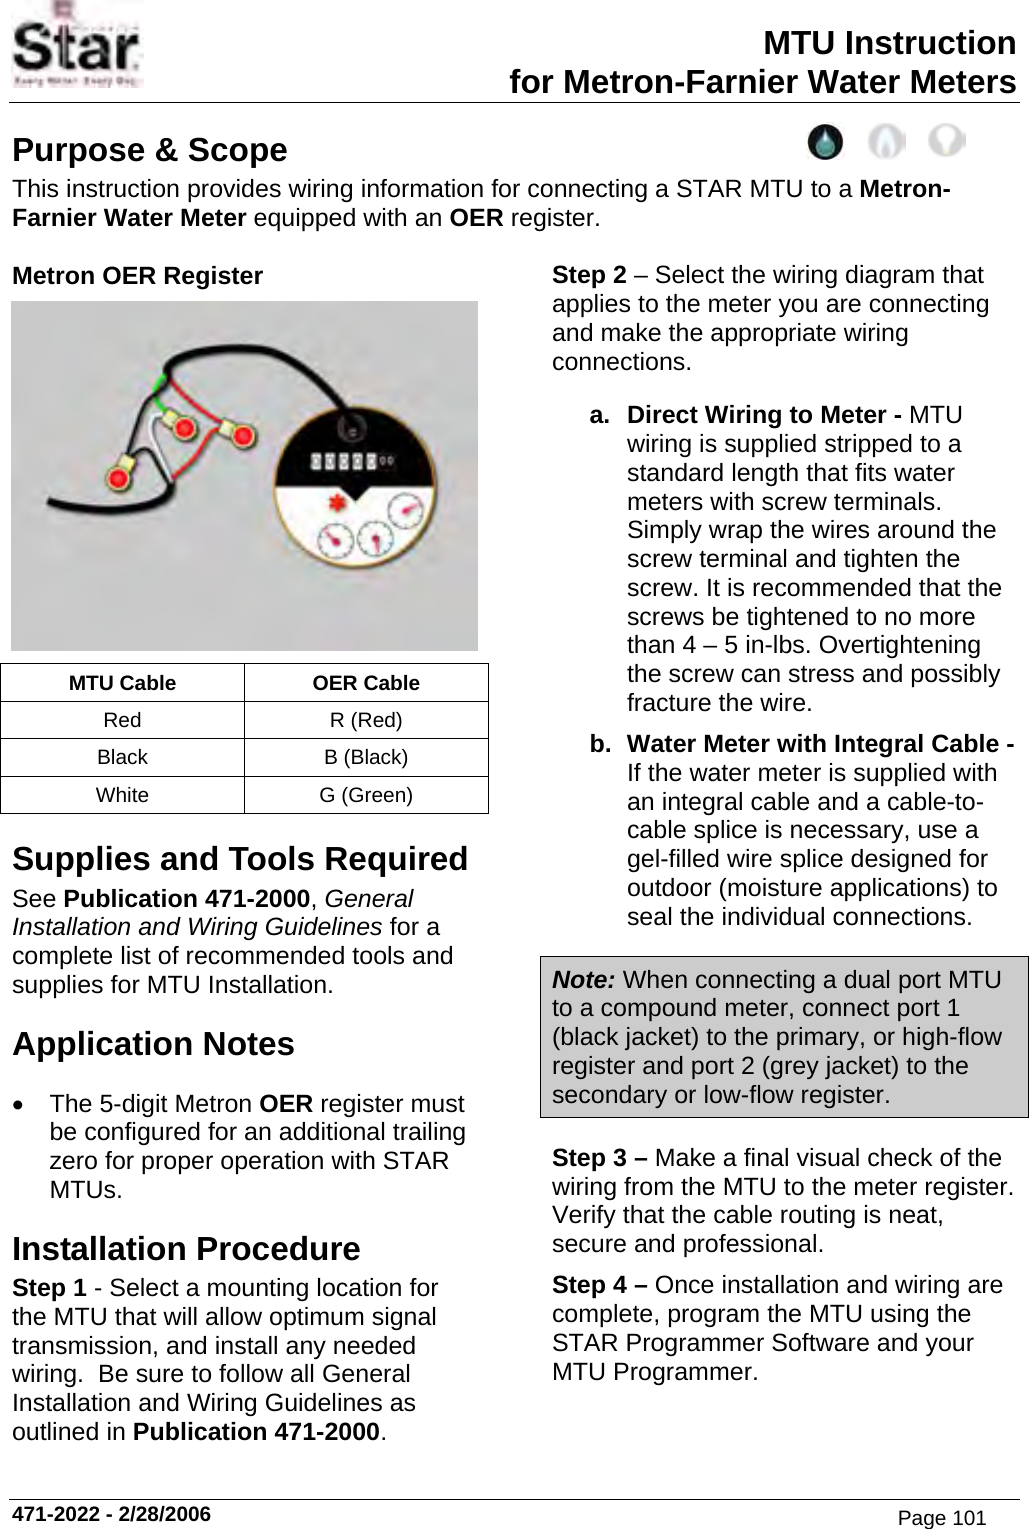 MTU Instruction for Metron-Farnier Water Meters Purpose &amp; Scope This instruction provides wiring information for connecting a STAR MTU to a Metron-Farnier Water Meter equipped with an OER register.  Metron OER Register  MTU Cable  OER Cable Red R (Red) Black B (Black) White G (Green) Supplies and Tools Required See Publication 471-2000, General Installation and Wiring Guidelines for a complete list of recommended tools and supplies for MTU Installation. Application Notes •  The 5-digit Metron OER register must be configured for an additional trailing zero for proper operation with STAR MTUs. Installation Procedure Step 1 - Select a mounting location for the MTU that will allow optimum signal transmission, and install any needed wiring.  Be sure to follow all General Installation and Wiring Guidelines as outlined in Publication 471-2000. Step 2 – Select the wiring diagram that applies to the meter you are connecting and make the appropriate wiring connections. a.  Direct Wiring to Meter - MTU wiring is supplied stripped to a standard length that fits water meters with screw terminals. Simply wrap the wires around the screw terminal and tighten the screw. It is recommended that the screws be tightened to no more than 4 – 5 in-lbs. Overtightening the screw can stress and possibly fracture the wire. b.  Water Meter with Integral Cable - If the water meter is supplied with an integral cable and a cable-to-cable splice is necessary, use a gel-filled wire splice designed for outdoor (moisture applications) to seal the individual connections. Note: When connecting a dual port MTU to a compound meter, connect port 1 (black jacket) to the primary, or high-flow register and port 2 (grey jacket) to the secondary or low-flow register. Step 3 – Make a final visual check of the wiring from the MTU to the meter register.  Verify that the cable routing is neat, secure and professional. Step 4 – Once installation and wiring are complete, program the MTU using the STAR Programmer Software and your MTU Programmer.  471-2022 - 2/28/2006 Page 101